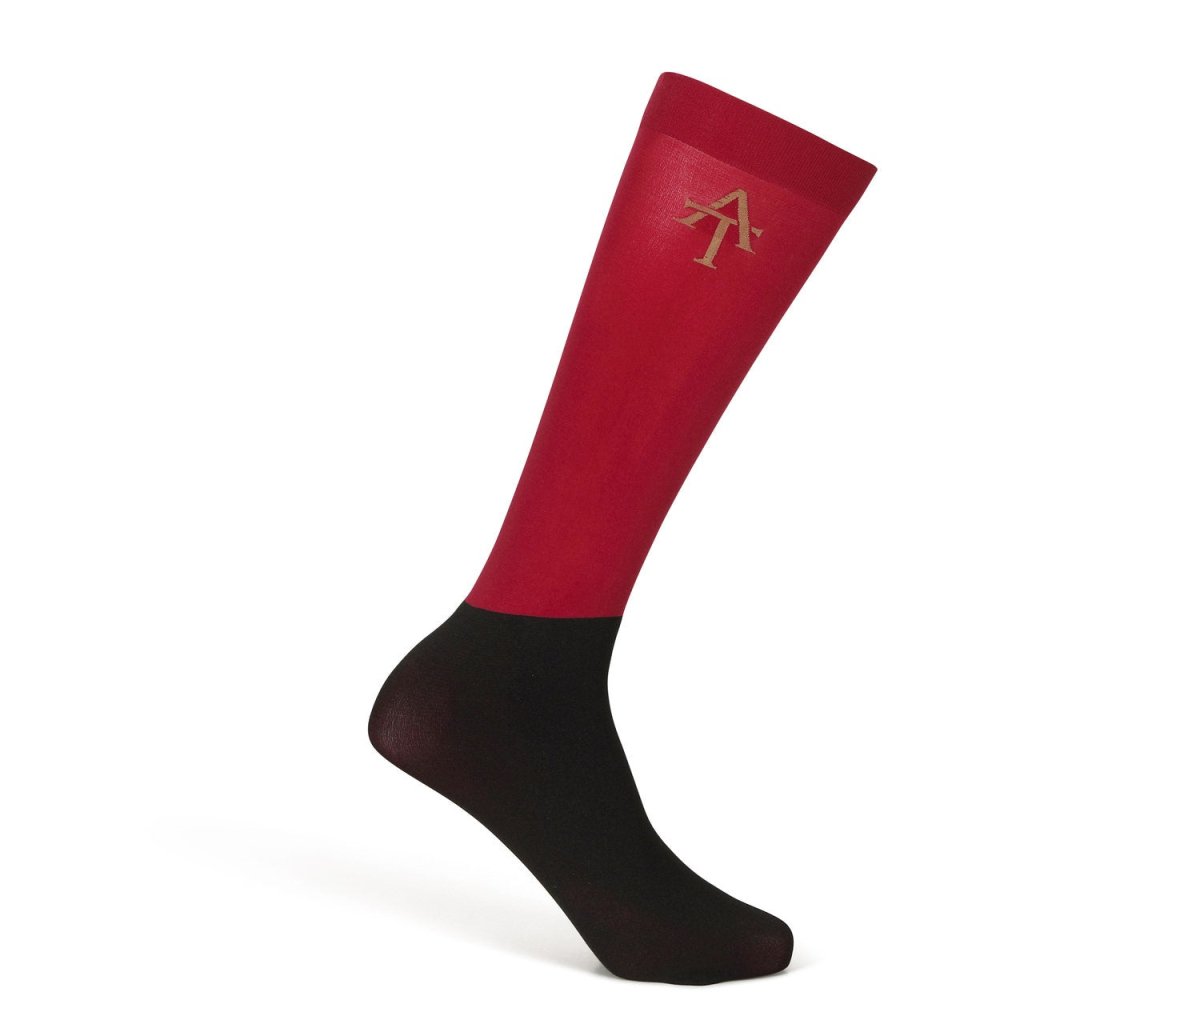 Aubrion SS24 Team Socks - Red - One Size